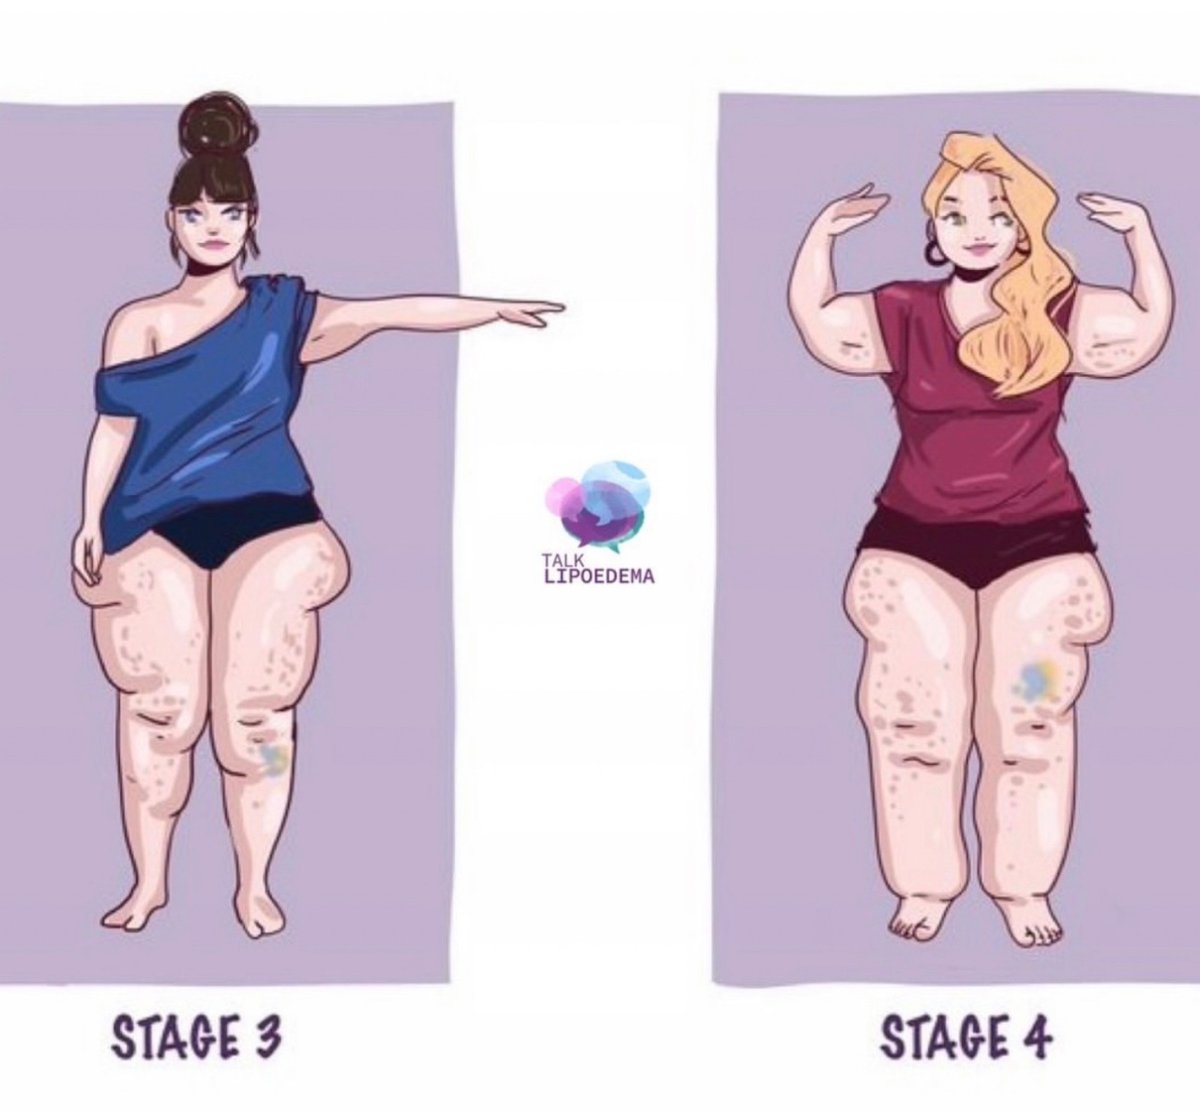 Do you have #lipoedema? here’s some  common symptoms: Large shaped legs, cuffs around ankles, Swollen legs that easily bruise + are painful to touch, Excess tissue gathered around knees and on inner thighs, Size doesn’t reduce with diet or exercise?? #lipedema #talklipoedema